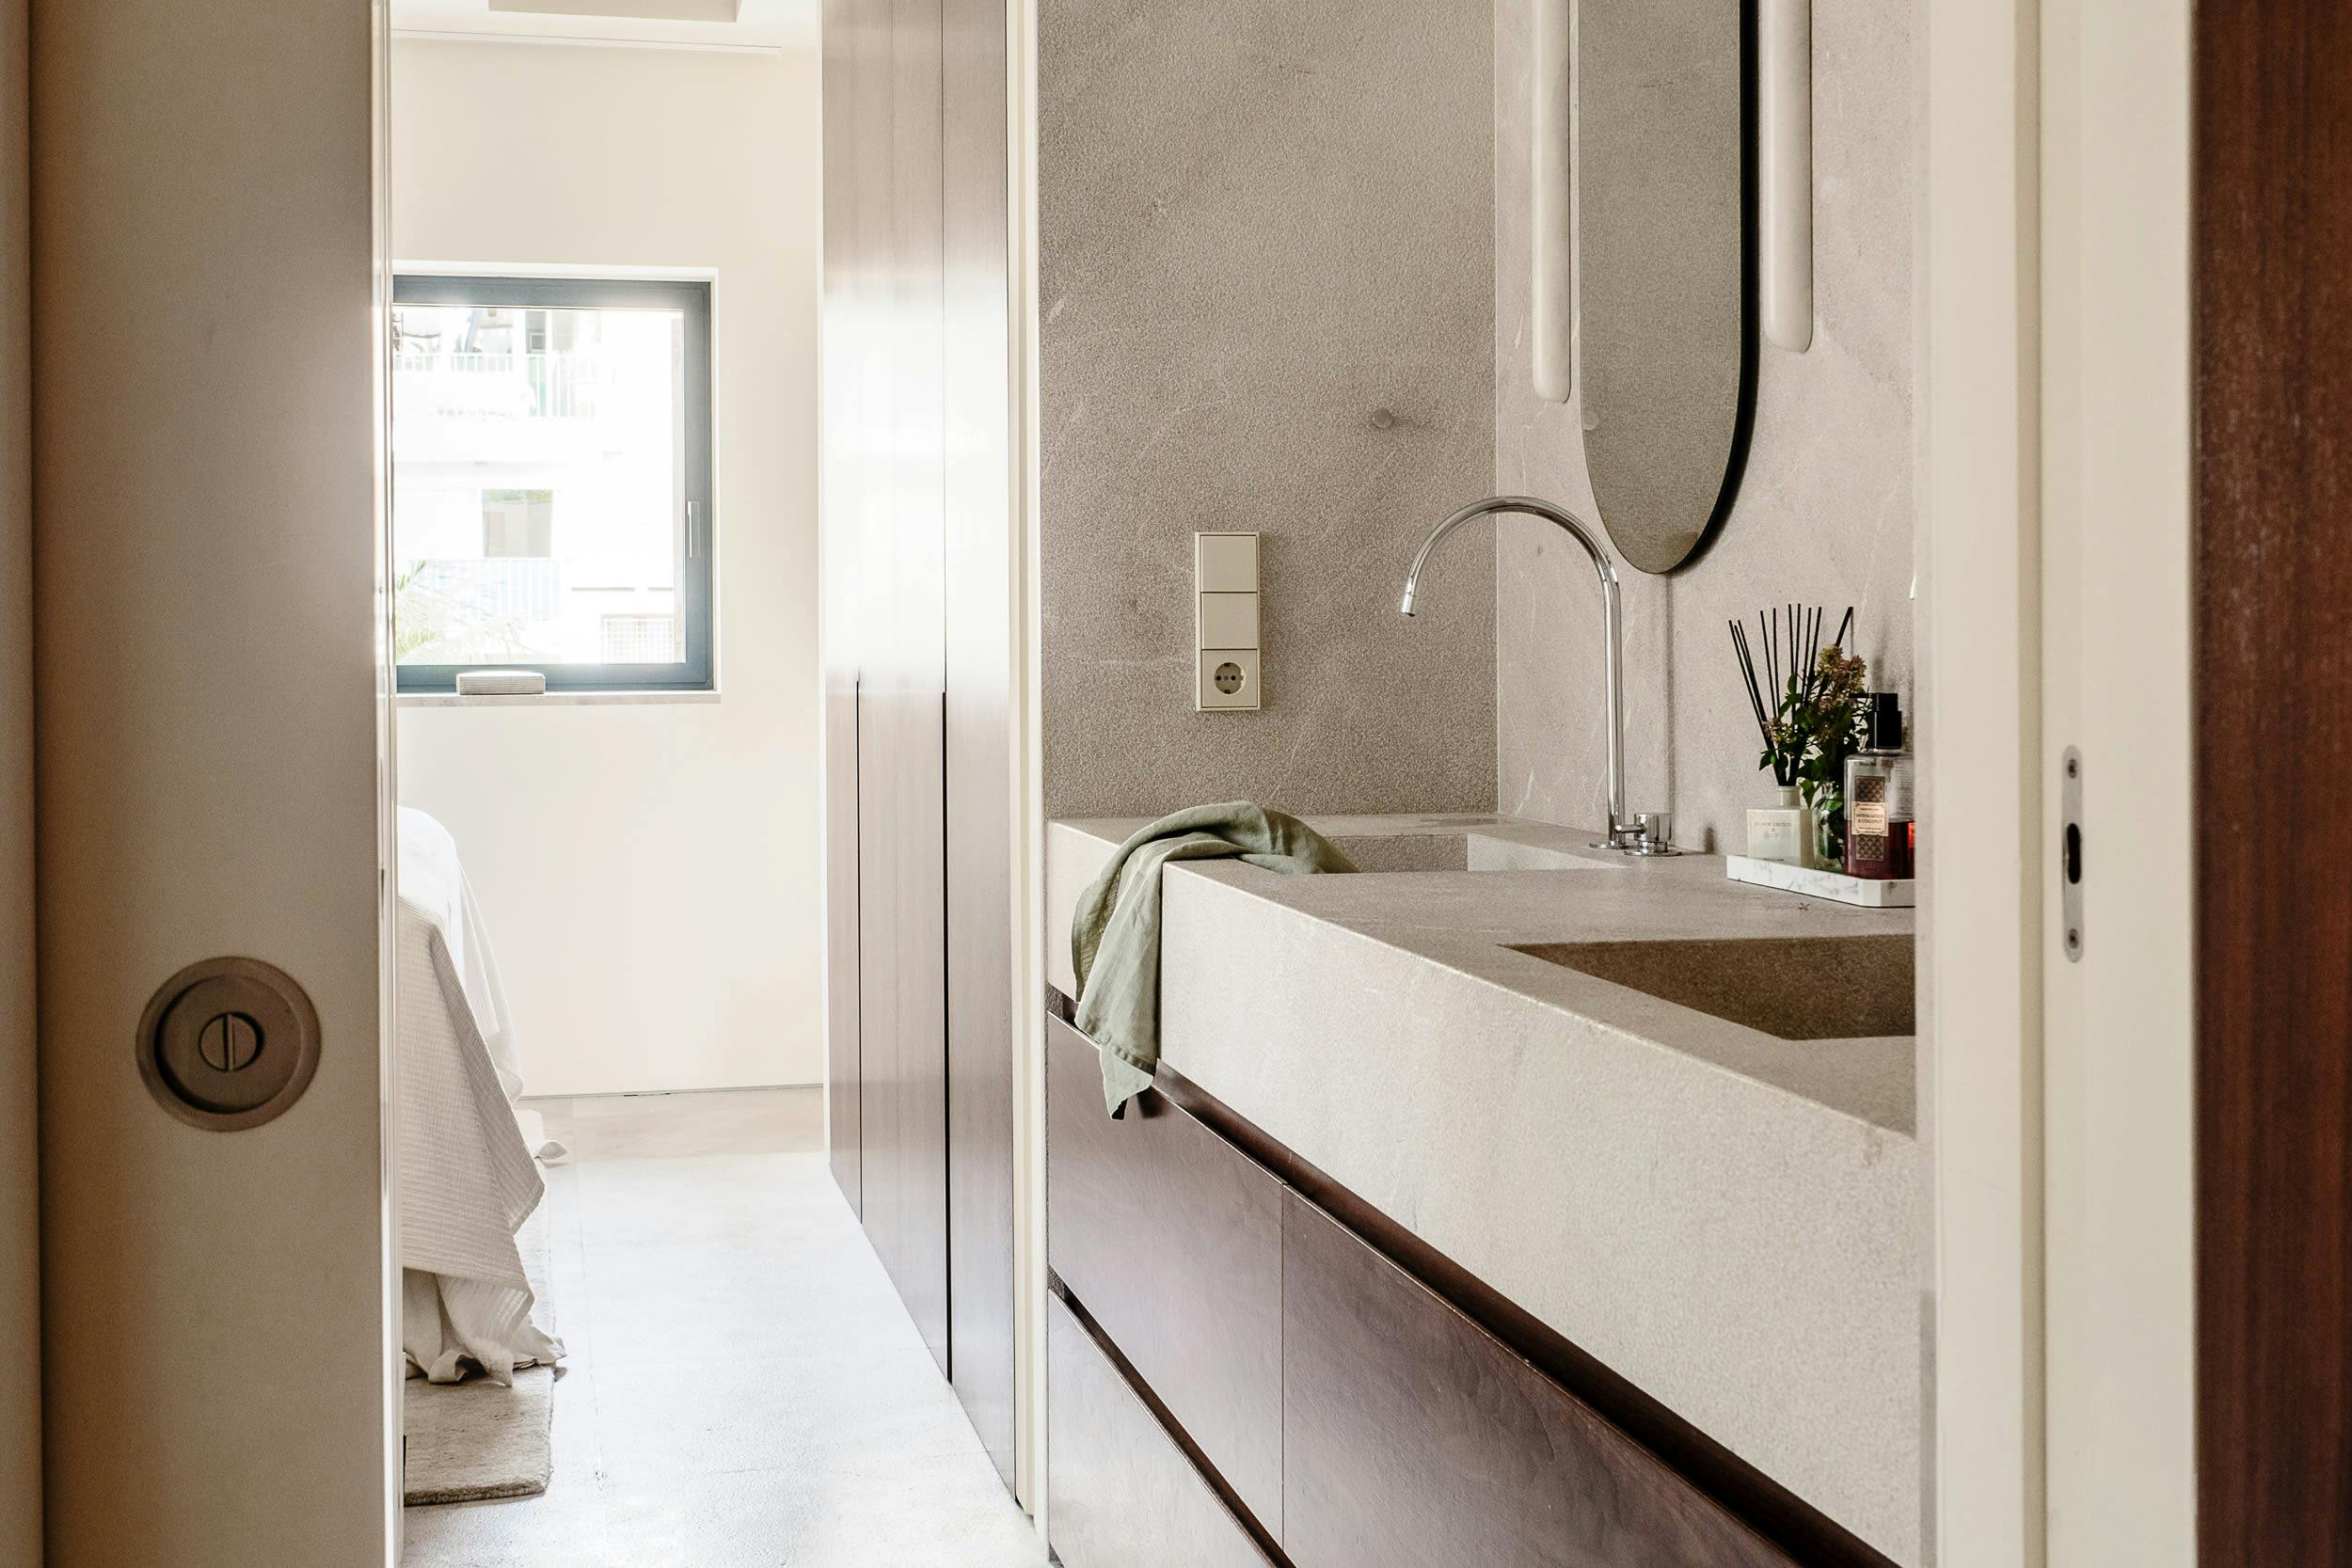 The image features a bathroom with a white sink, a mirror, a window, and a door.